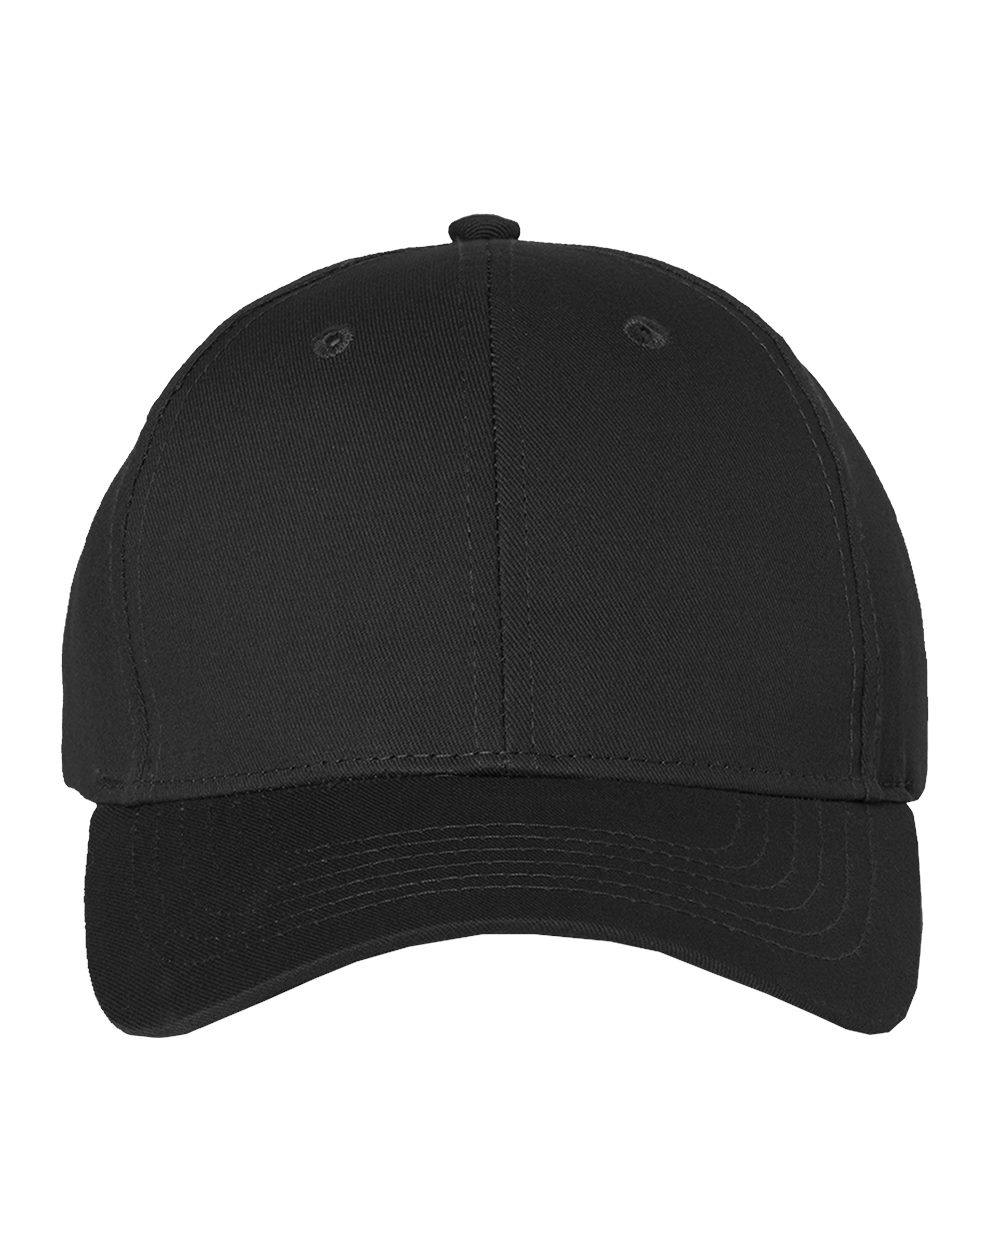 Image for Adult Cotton Twill Cap - 2260